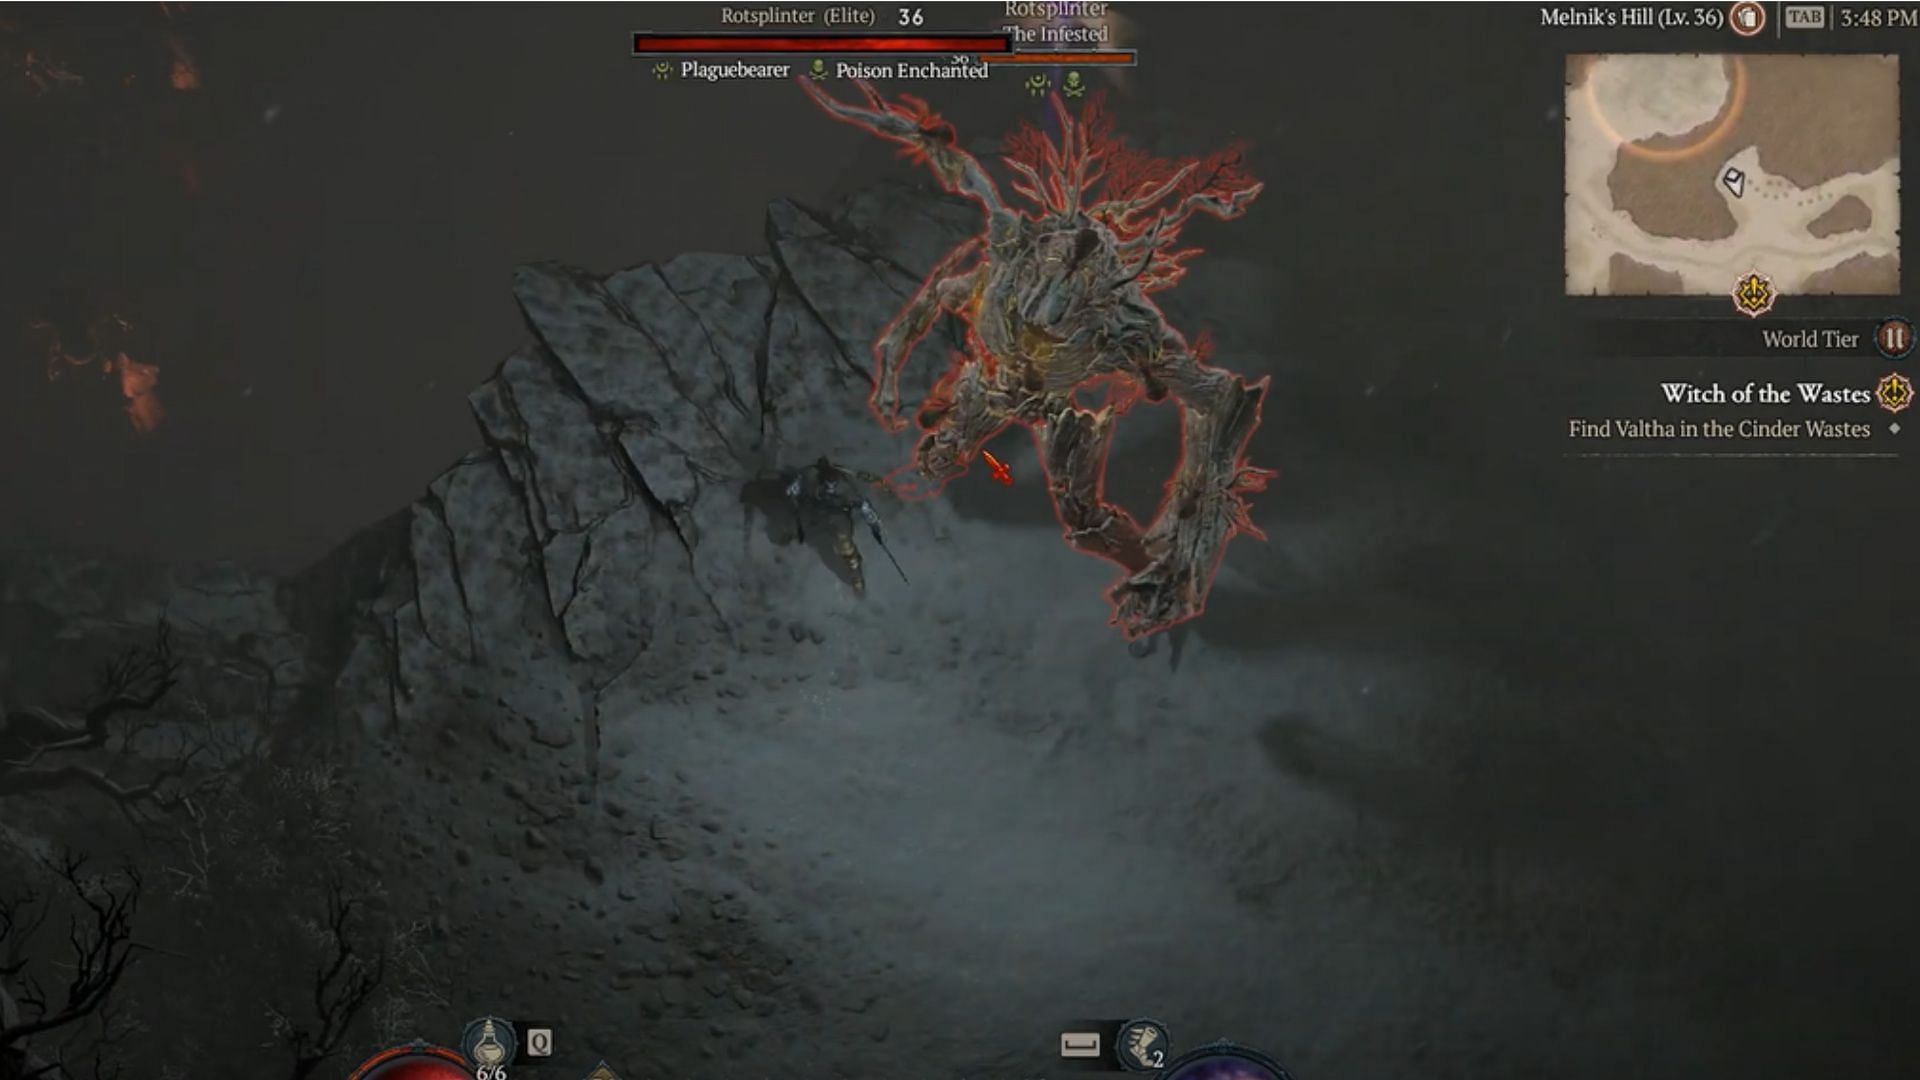 The boss encounters in Diablo 4 provide exciting gameplay (Image via Blizzard Entertainment)